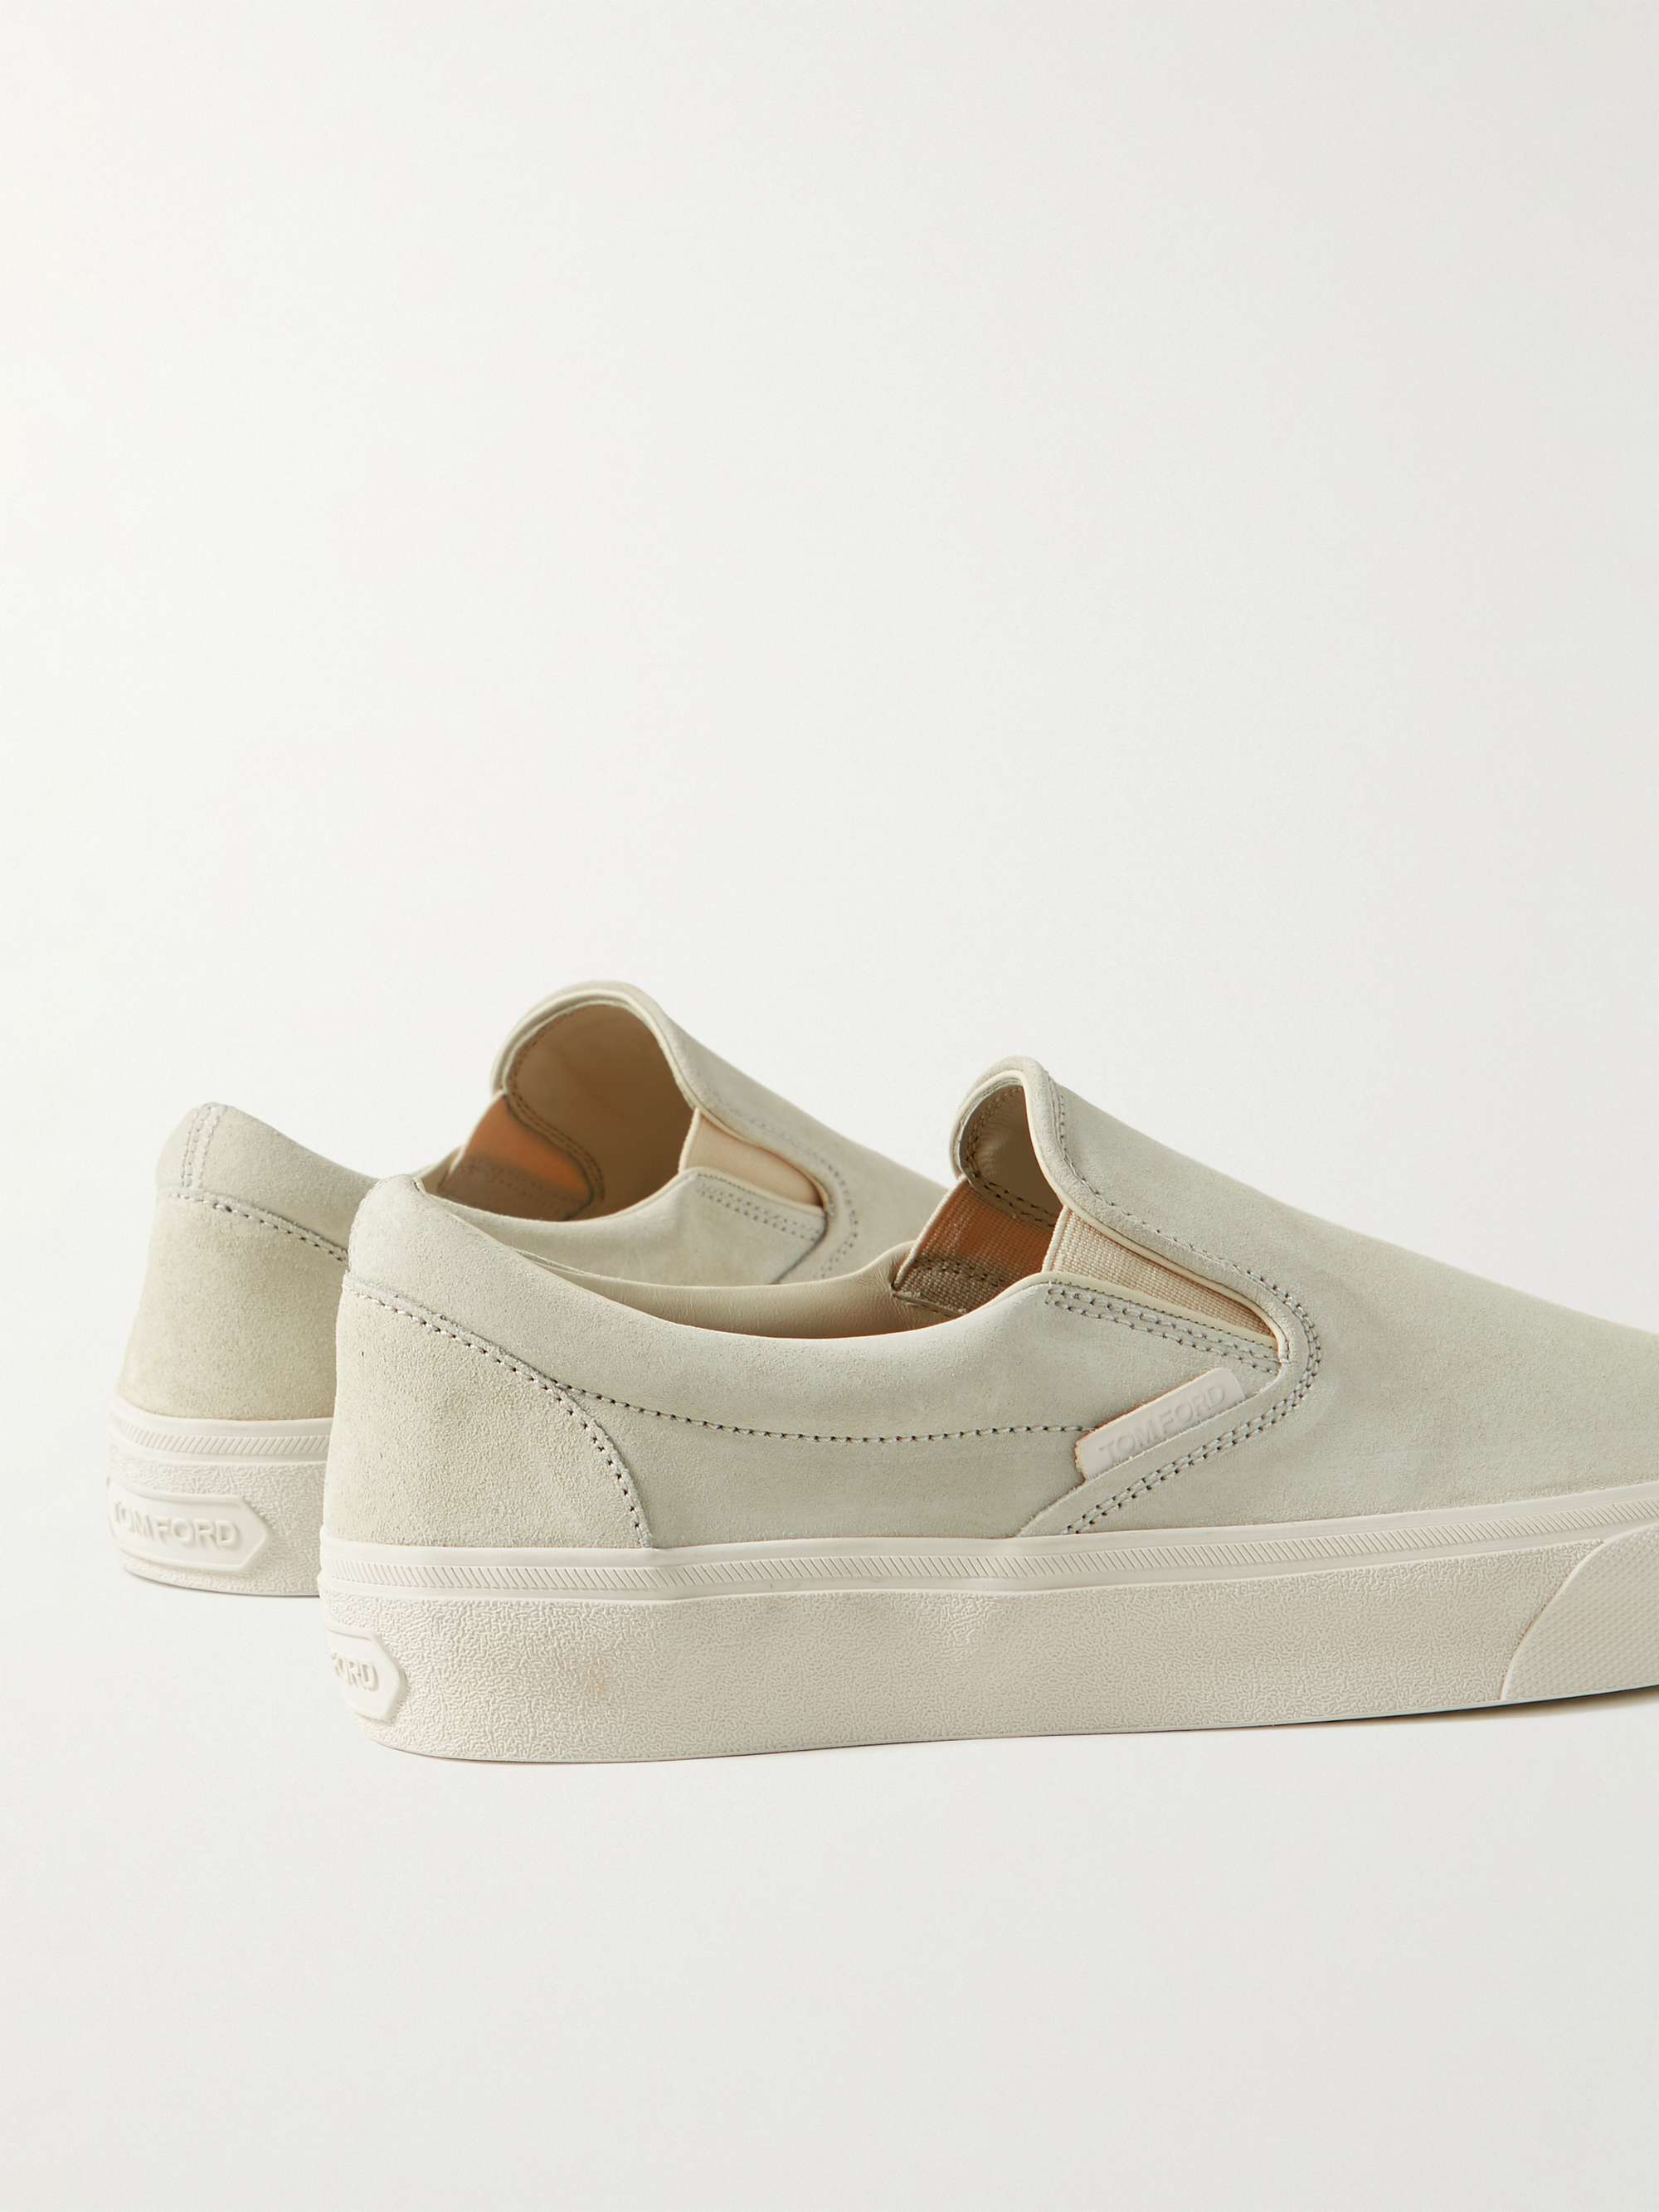 TOM FORD Jude Suede Slip-On Sneakers